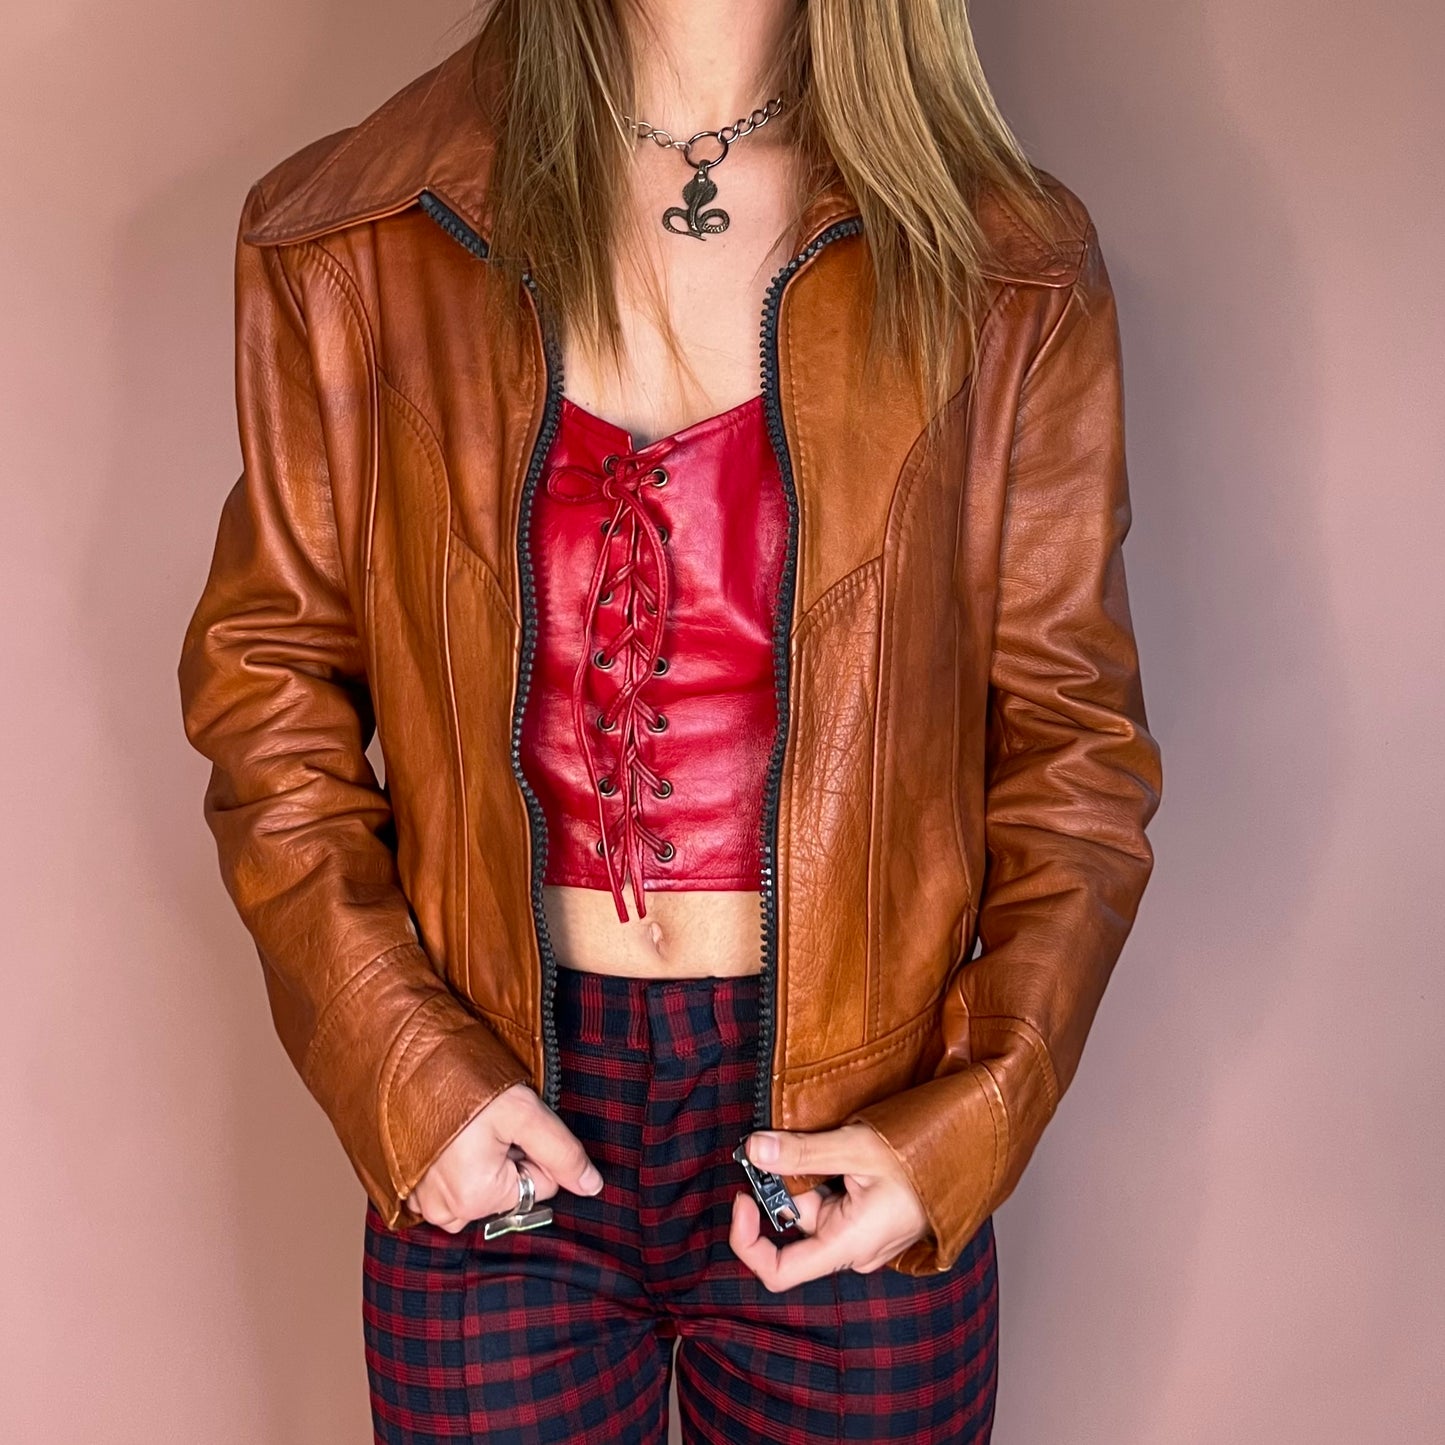 Classic 1970s tan leather jacket